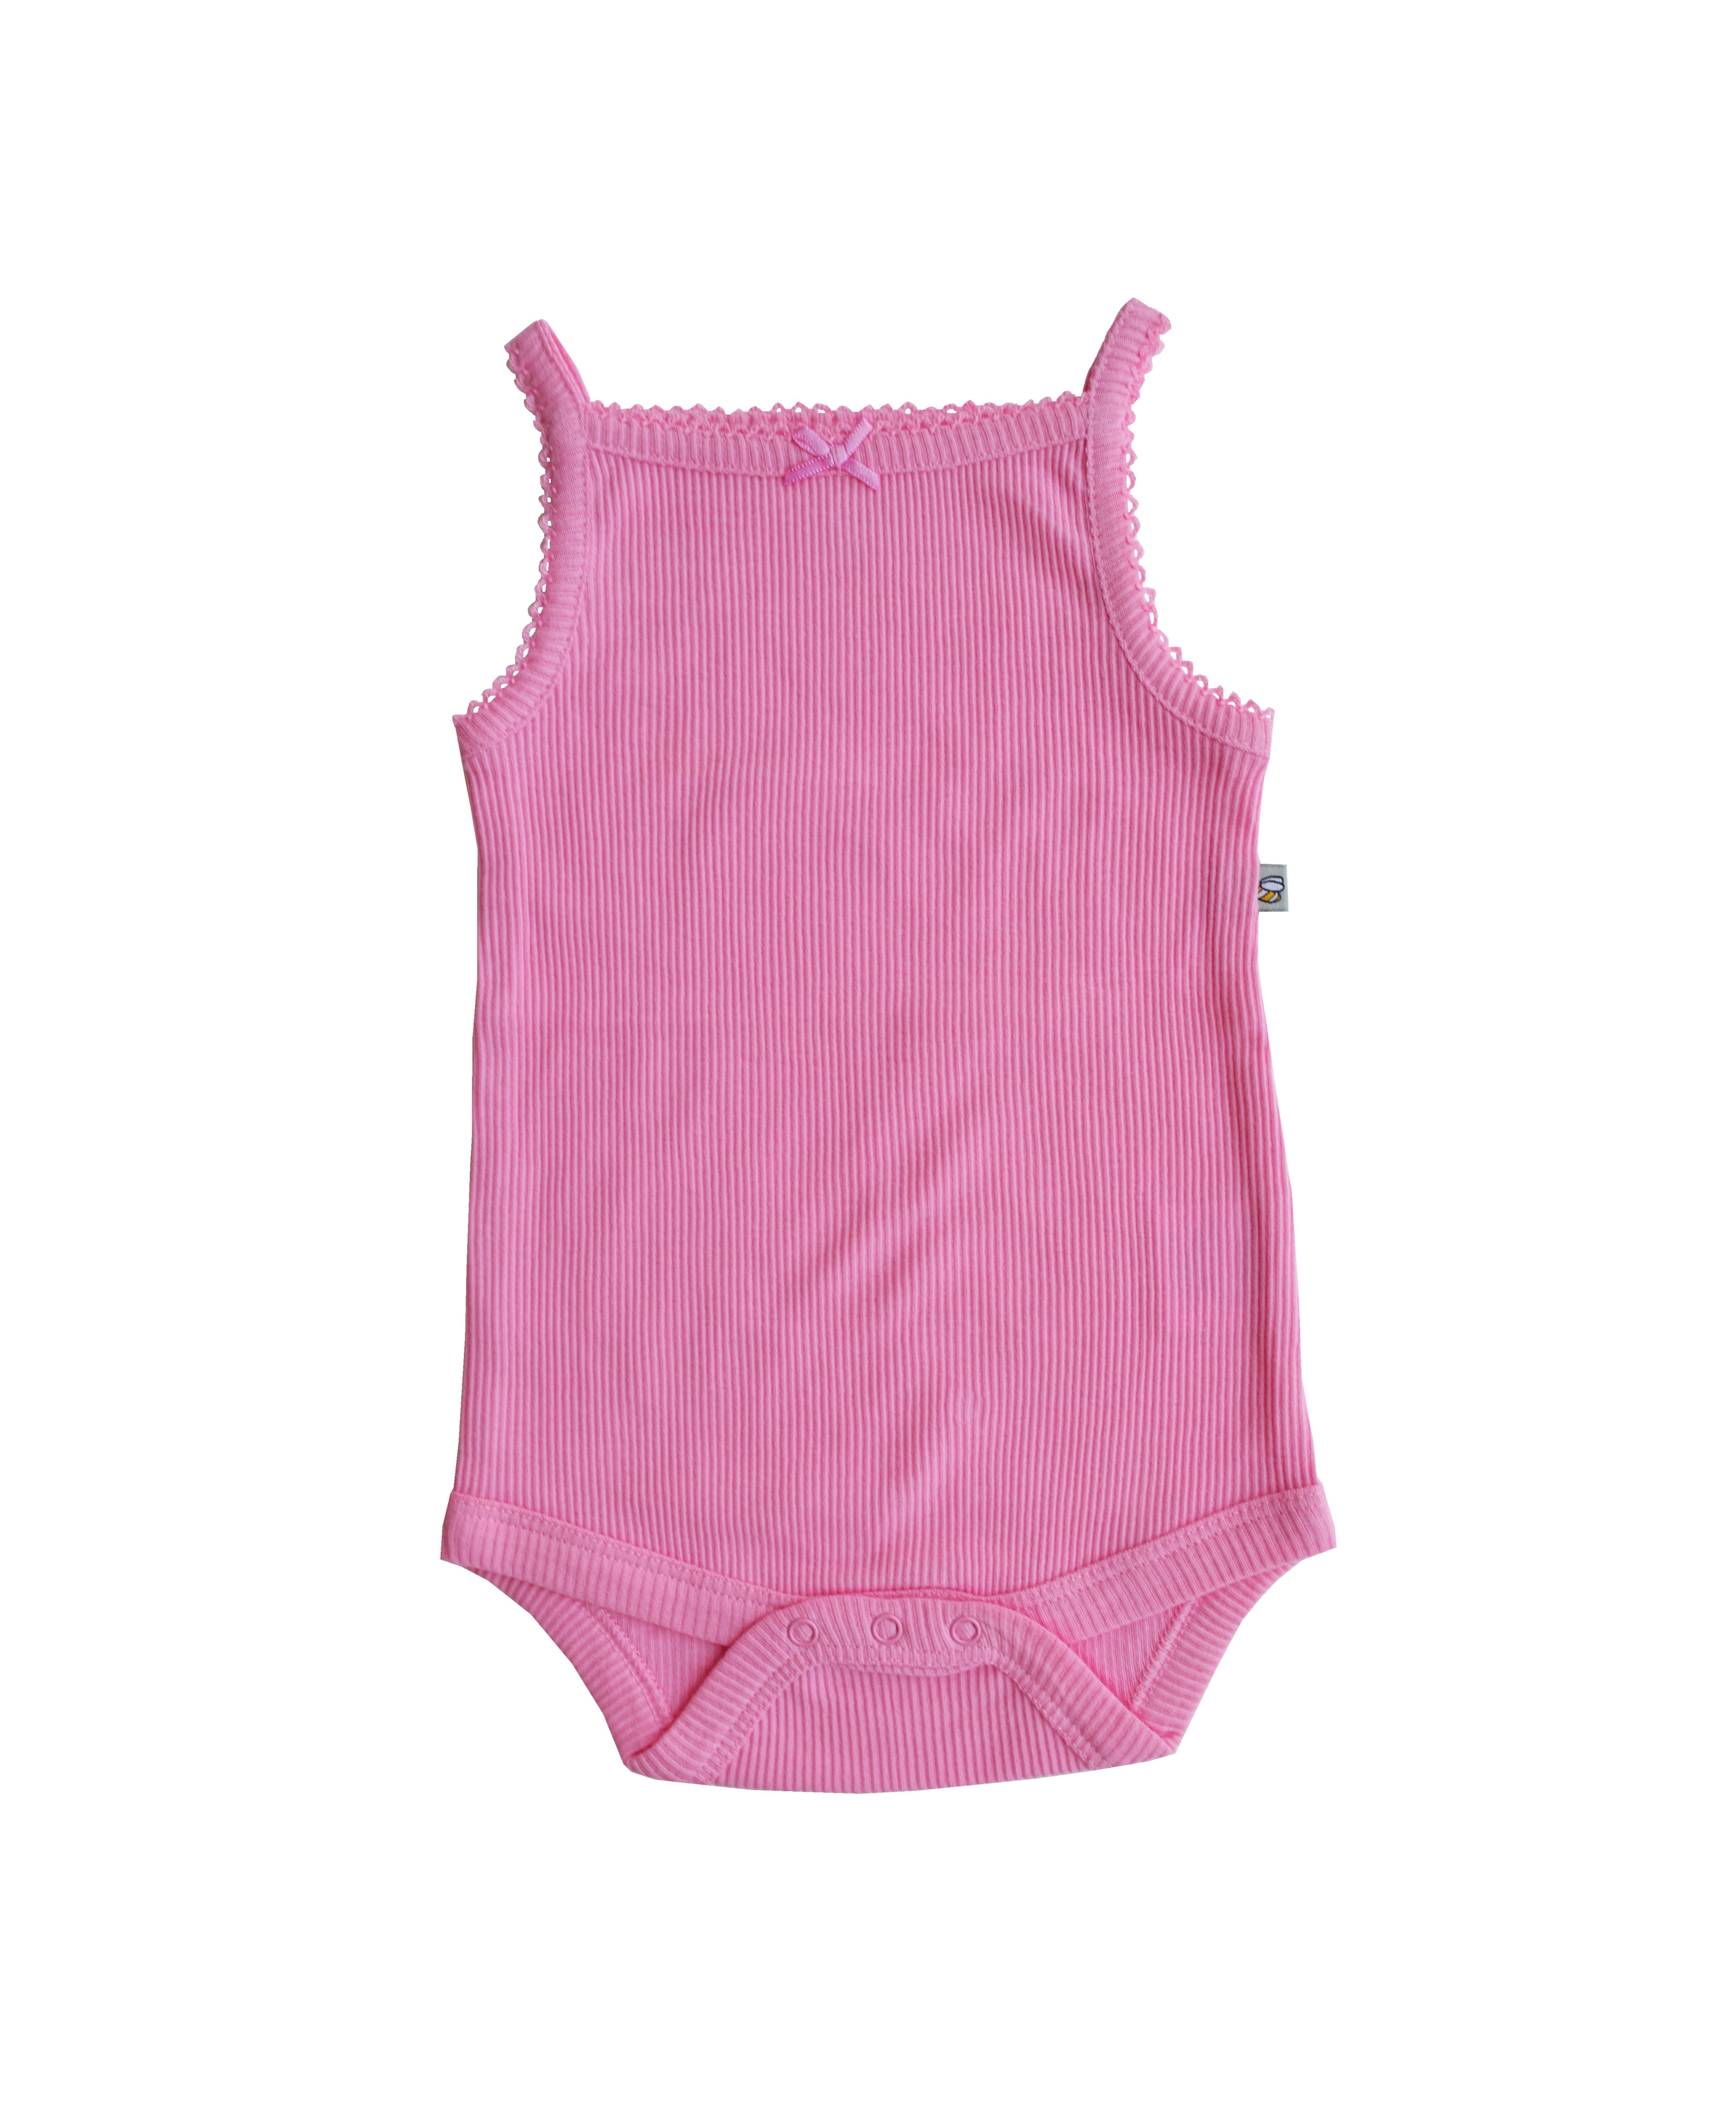 Babeez | Pink Bodysuit with satin bow (100% Cotton Rib) undefined